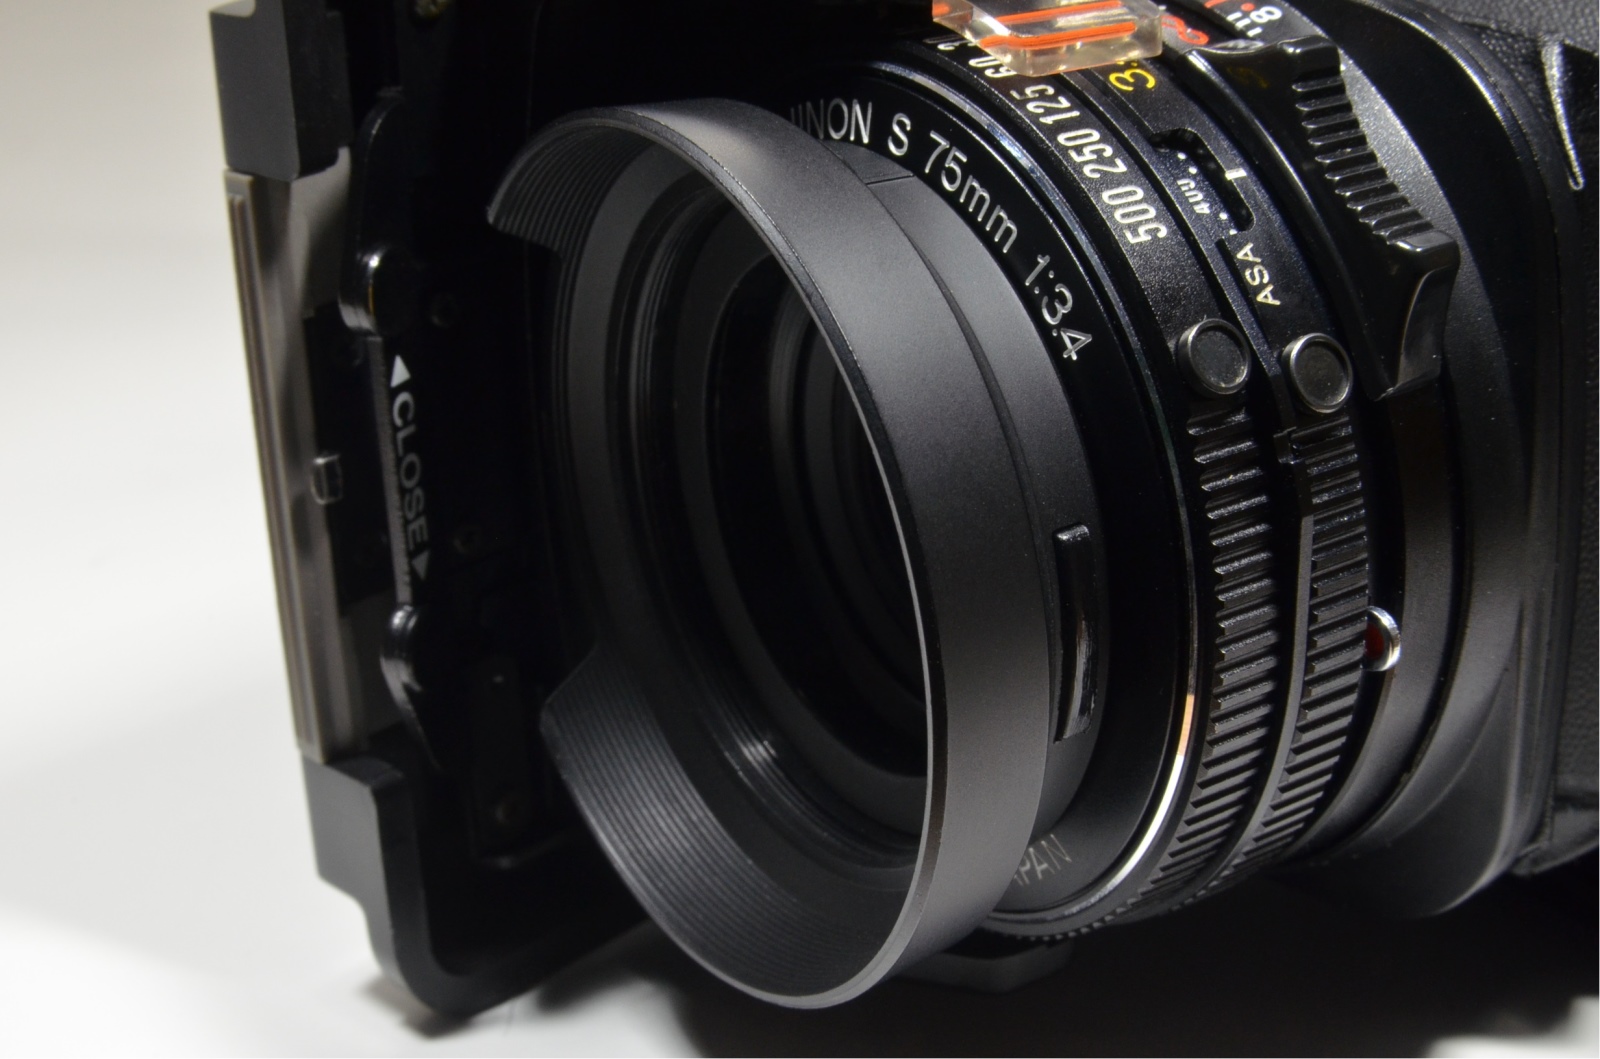 fujifilm fujica gs645 with lens hood and close-up finder set